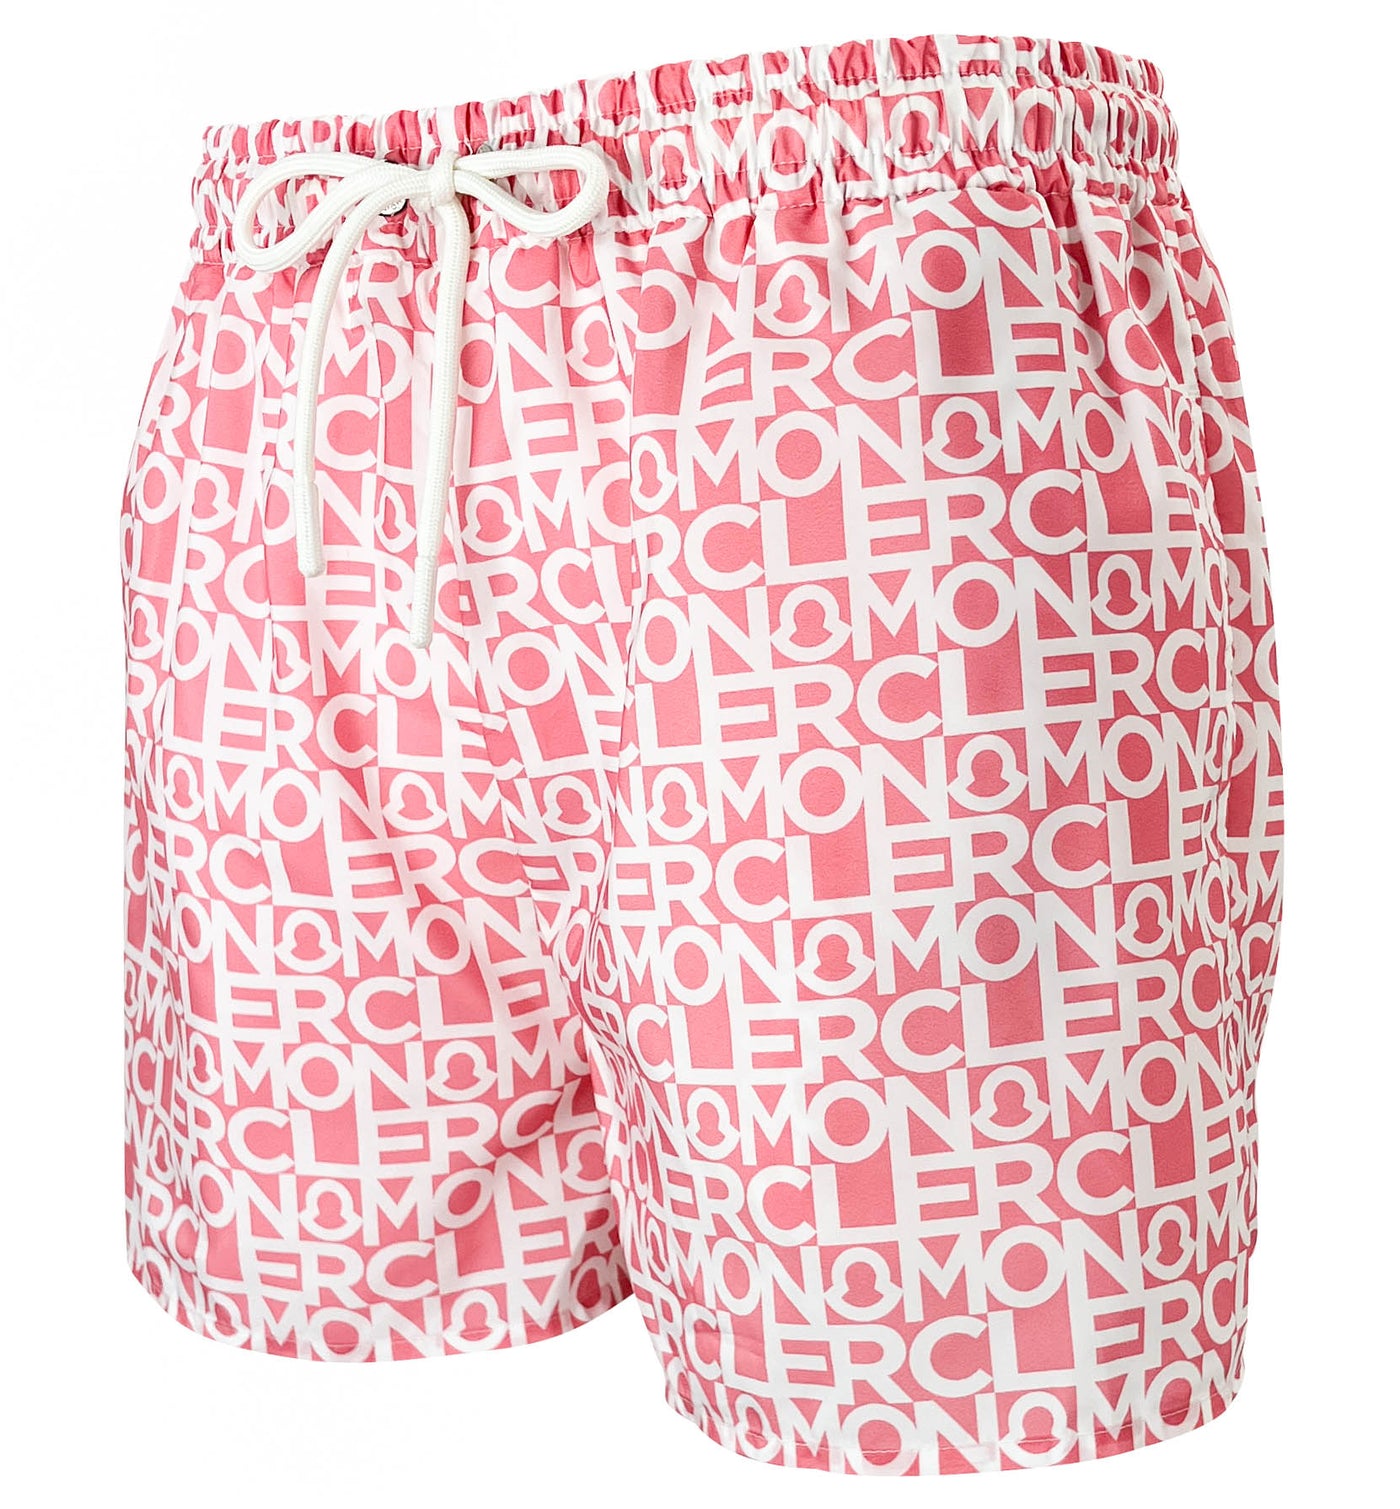 Moncler Logo Shorts in Pink and White - Discounts on Moncler at UAL